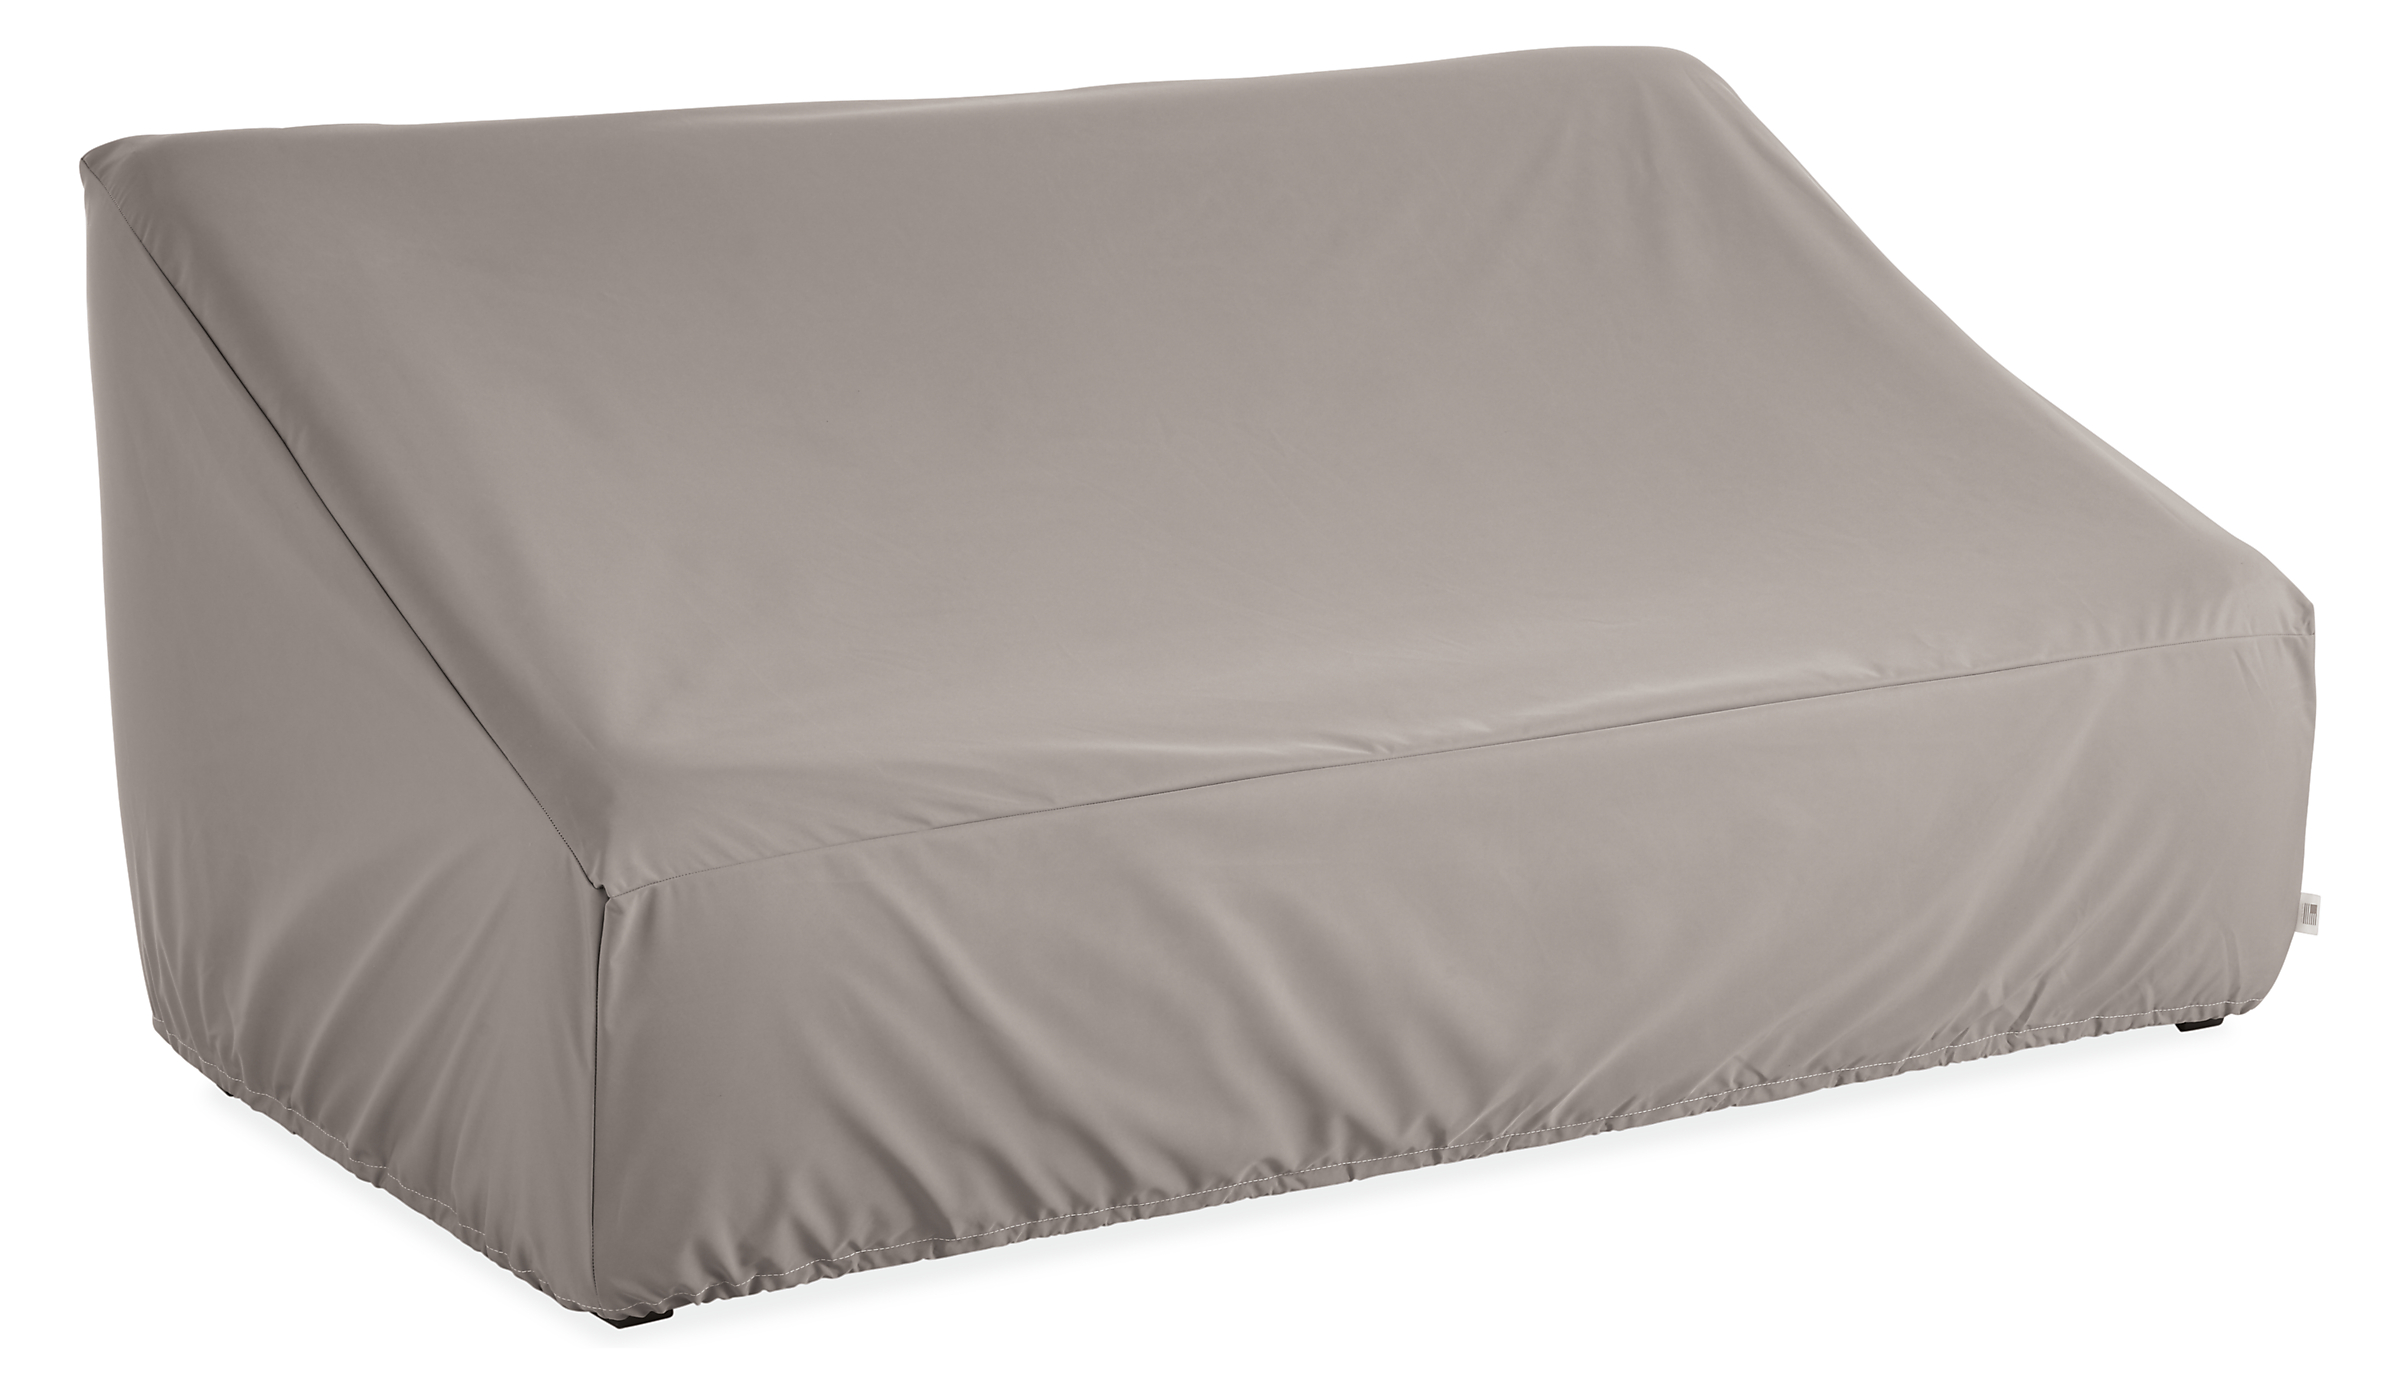 Outdoor Cover for Sofa 91w 35d 29h with Drawstring